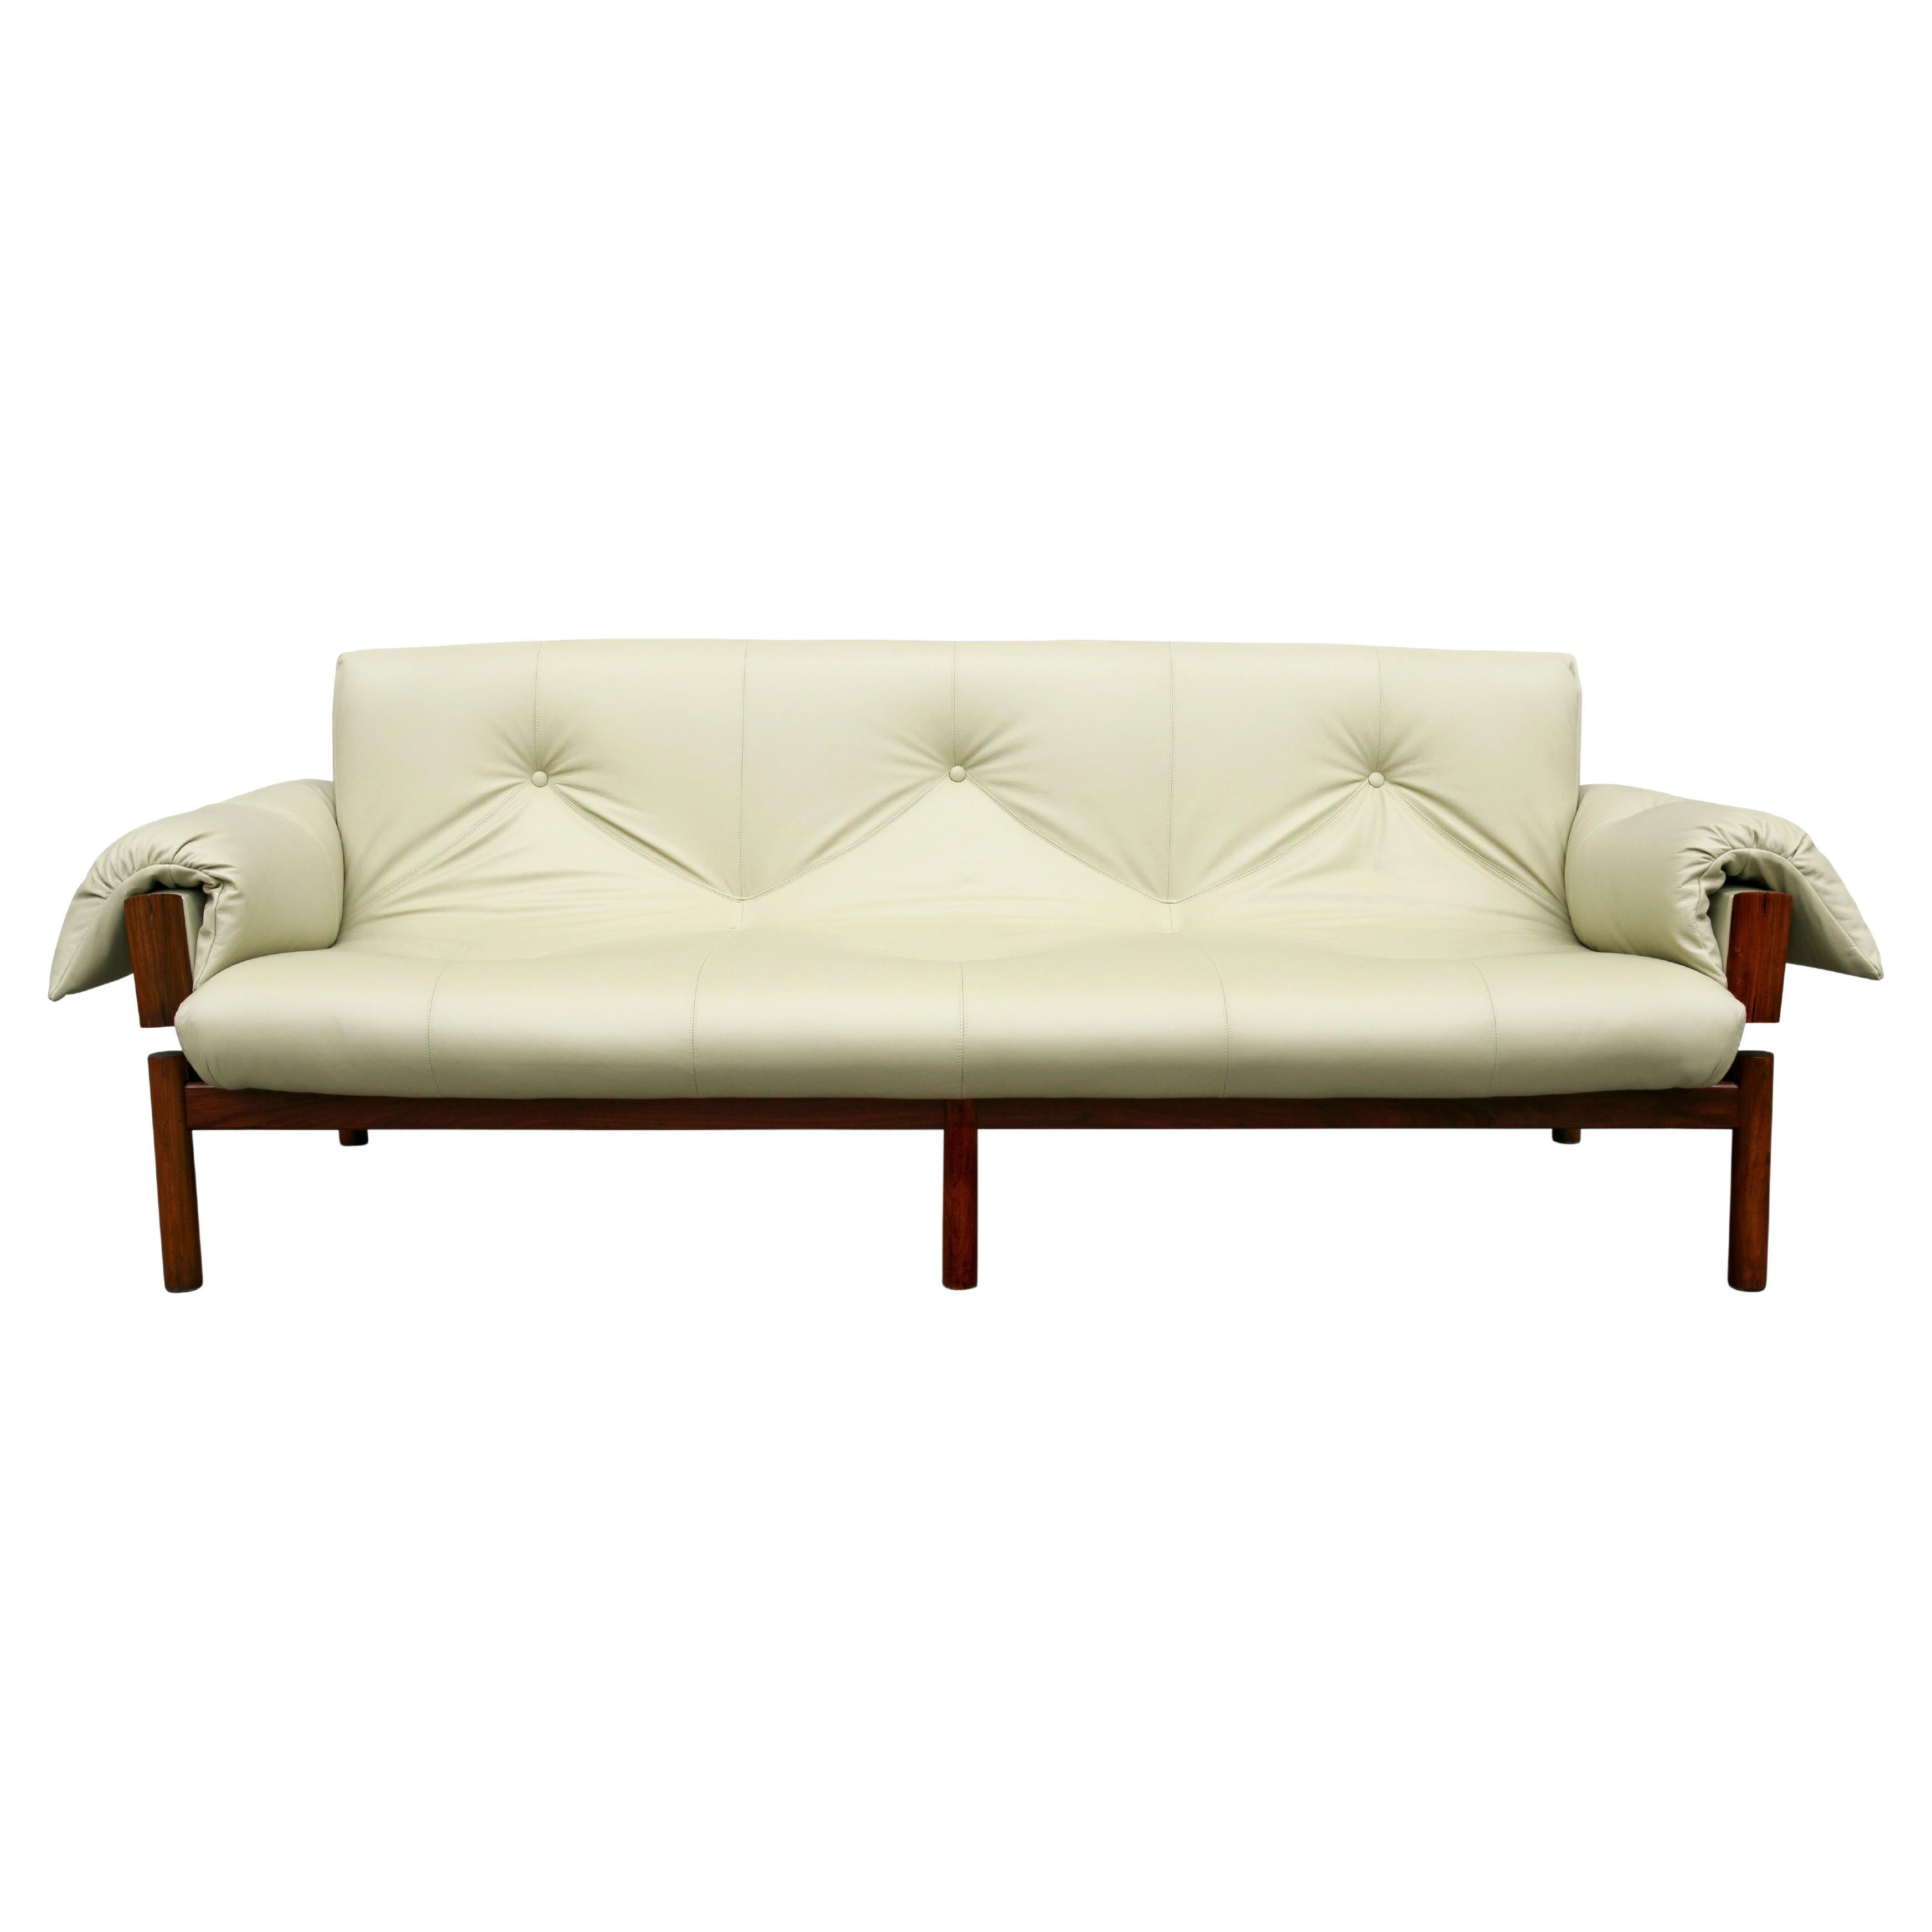 Midcentury Sofa MP-13 by Percival Lafer in Hardwood & Beige Leather, 1967 Brasil For Sale